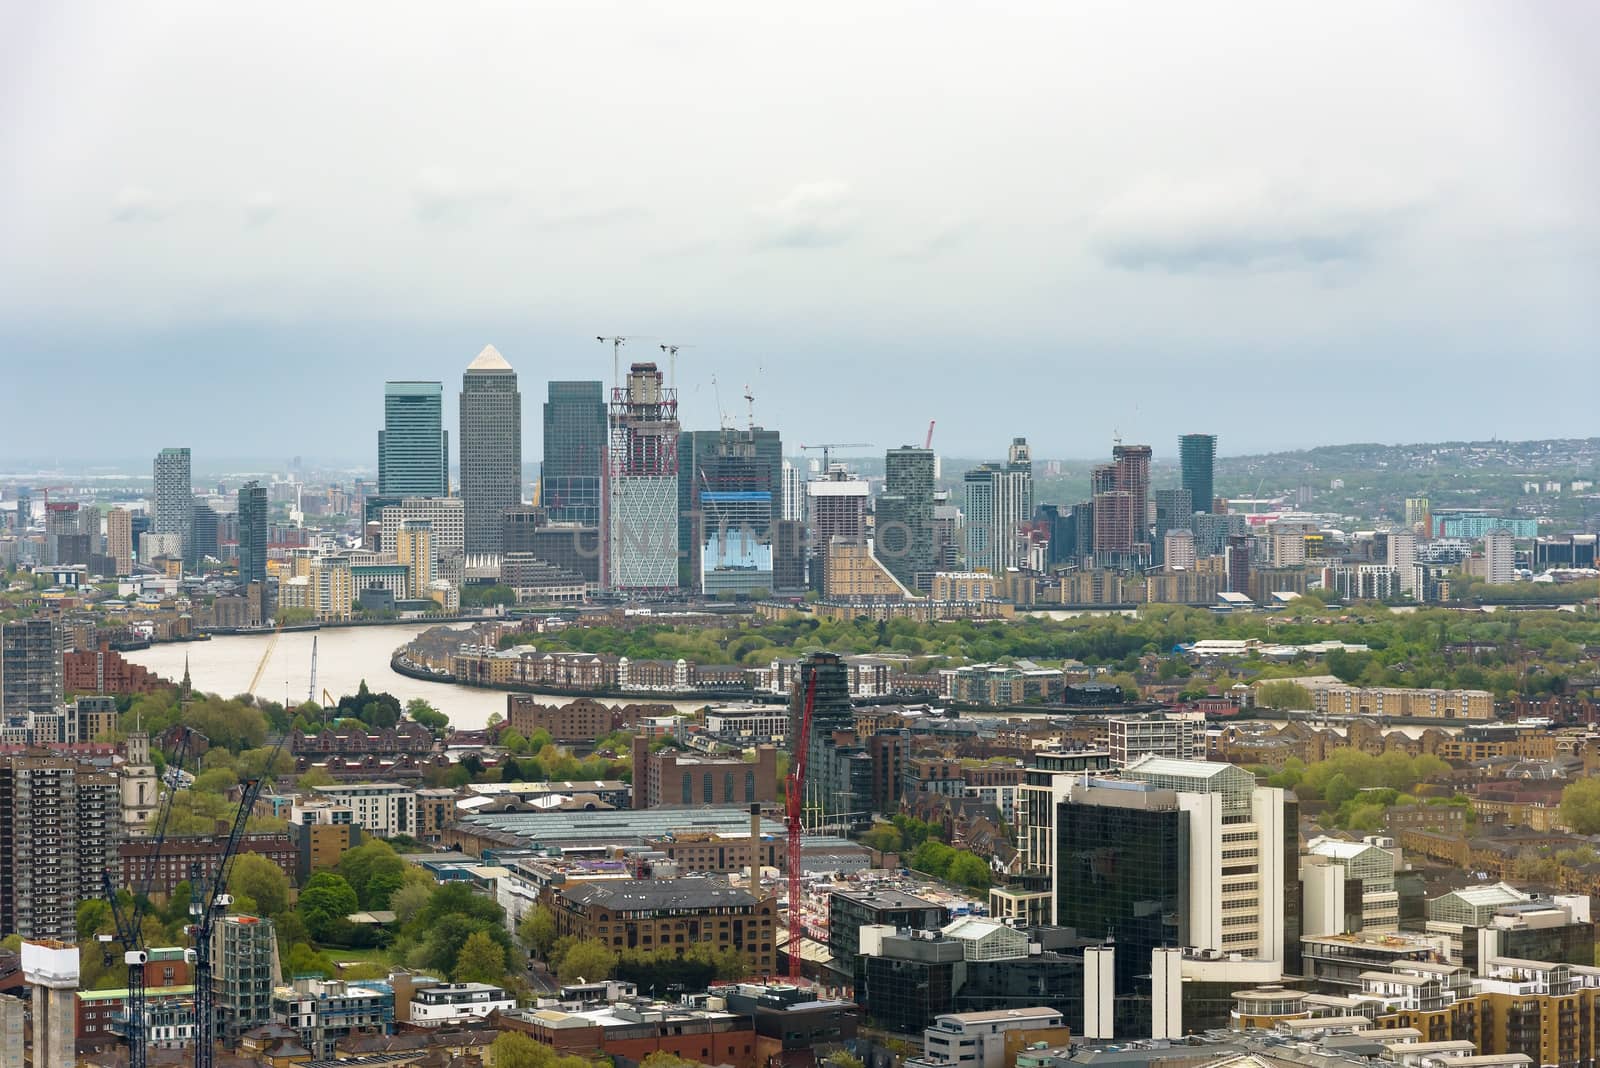 London skyline on a cloudy day by mkos83